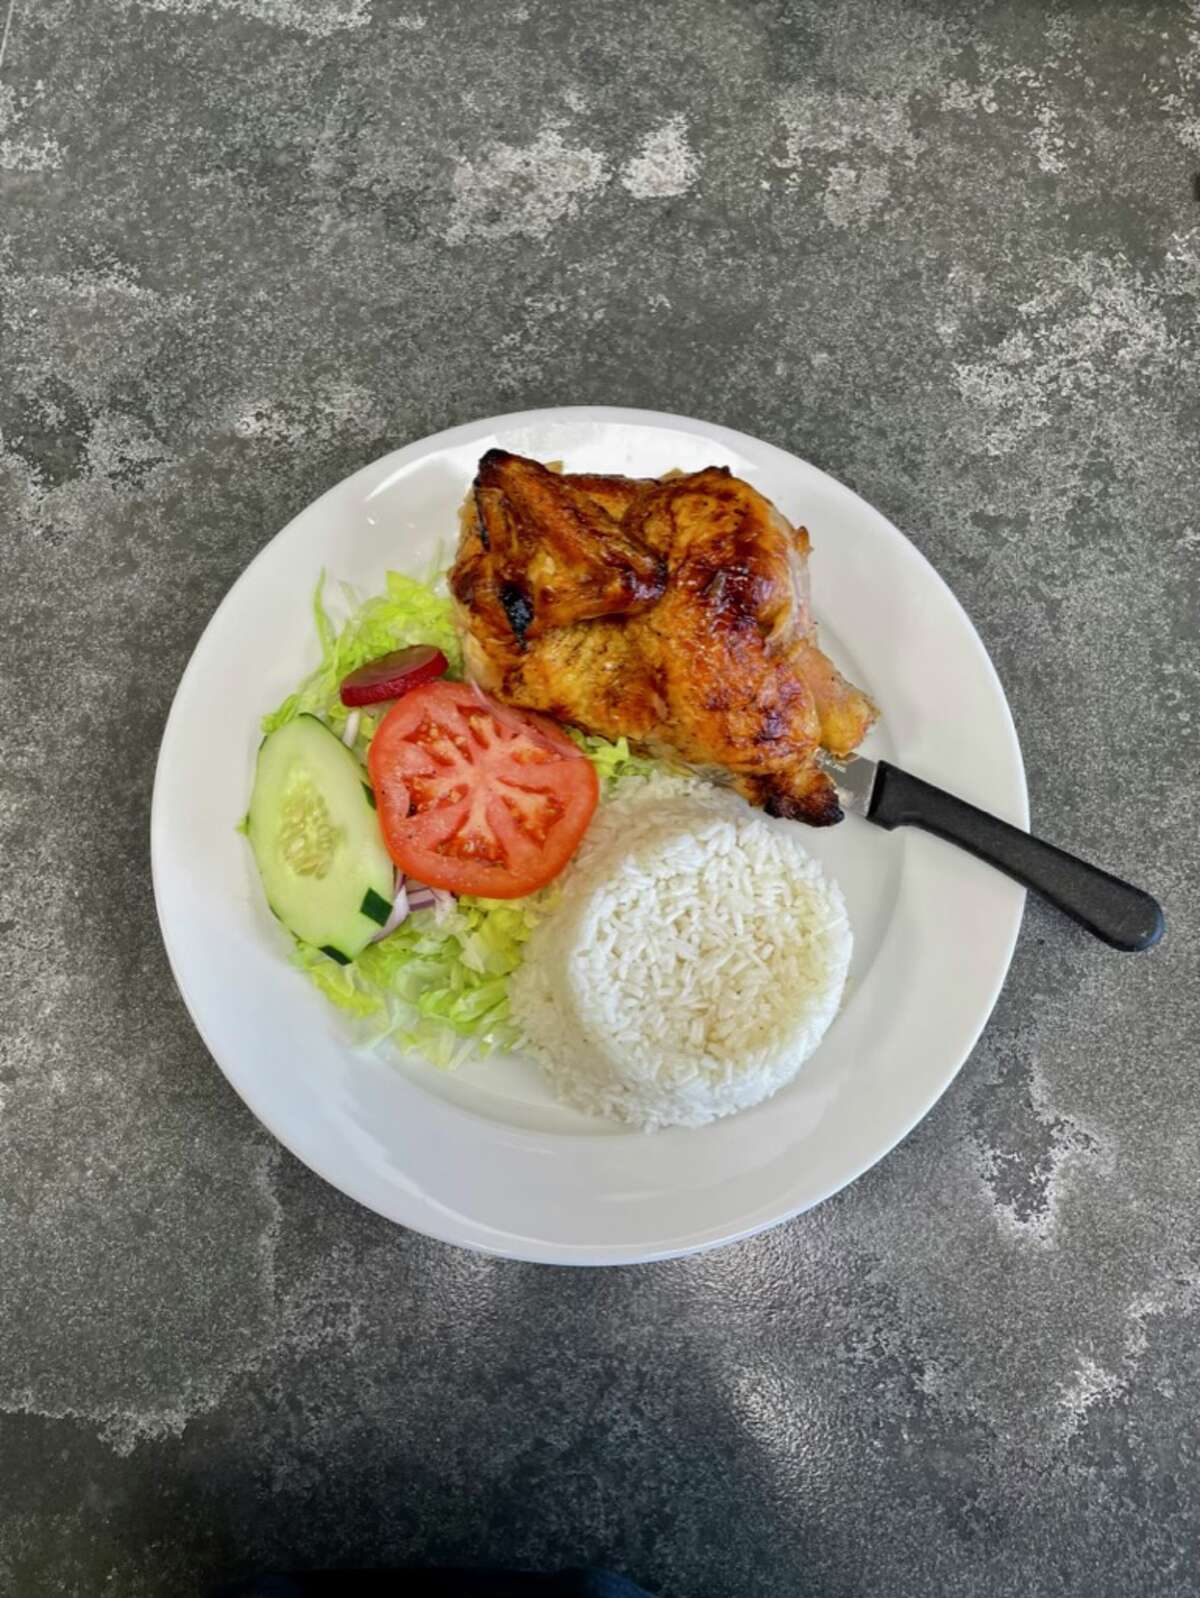 Pollo a la brasa with salad and rice at Fiesta Westside in Stamford